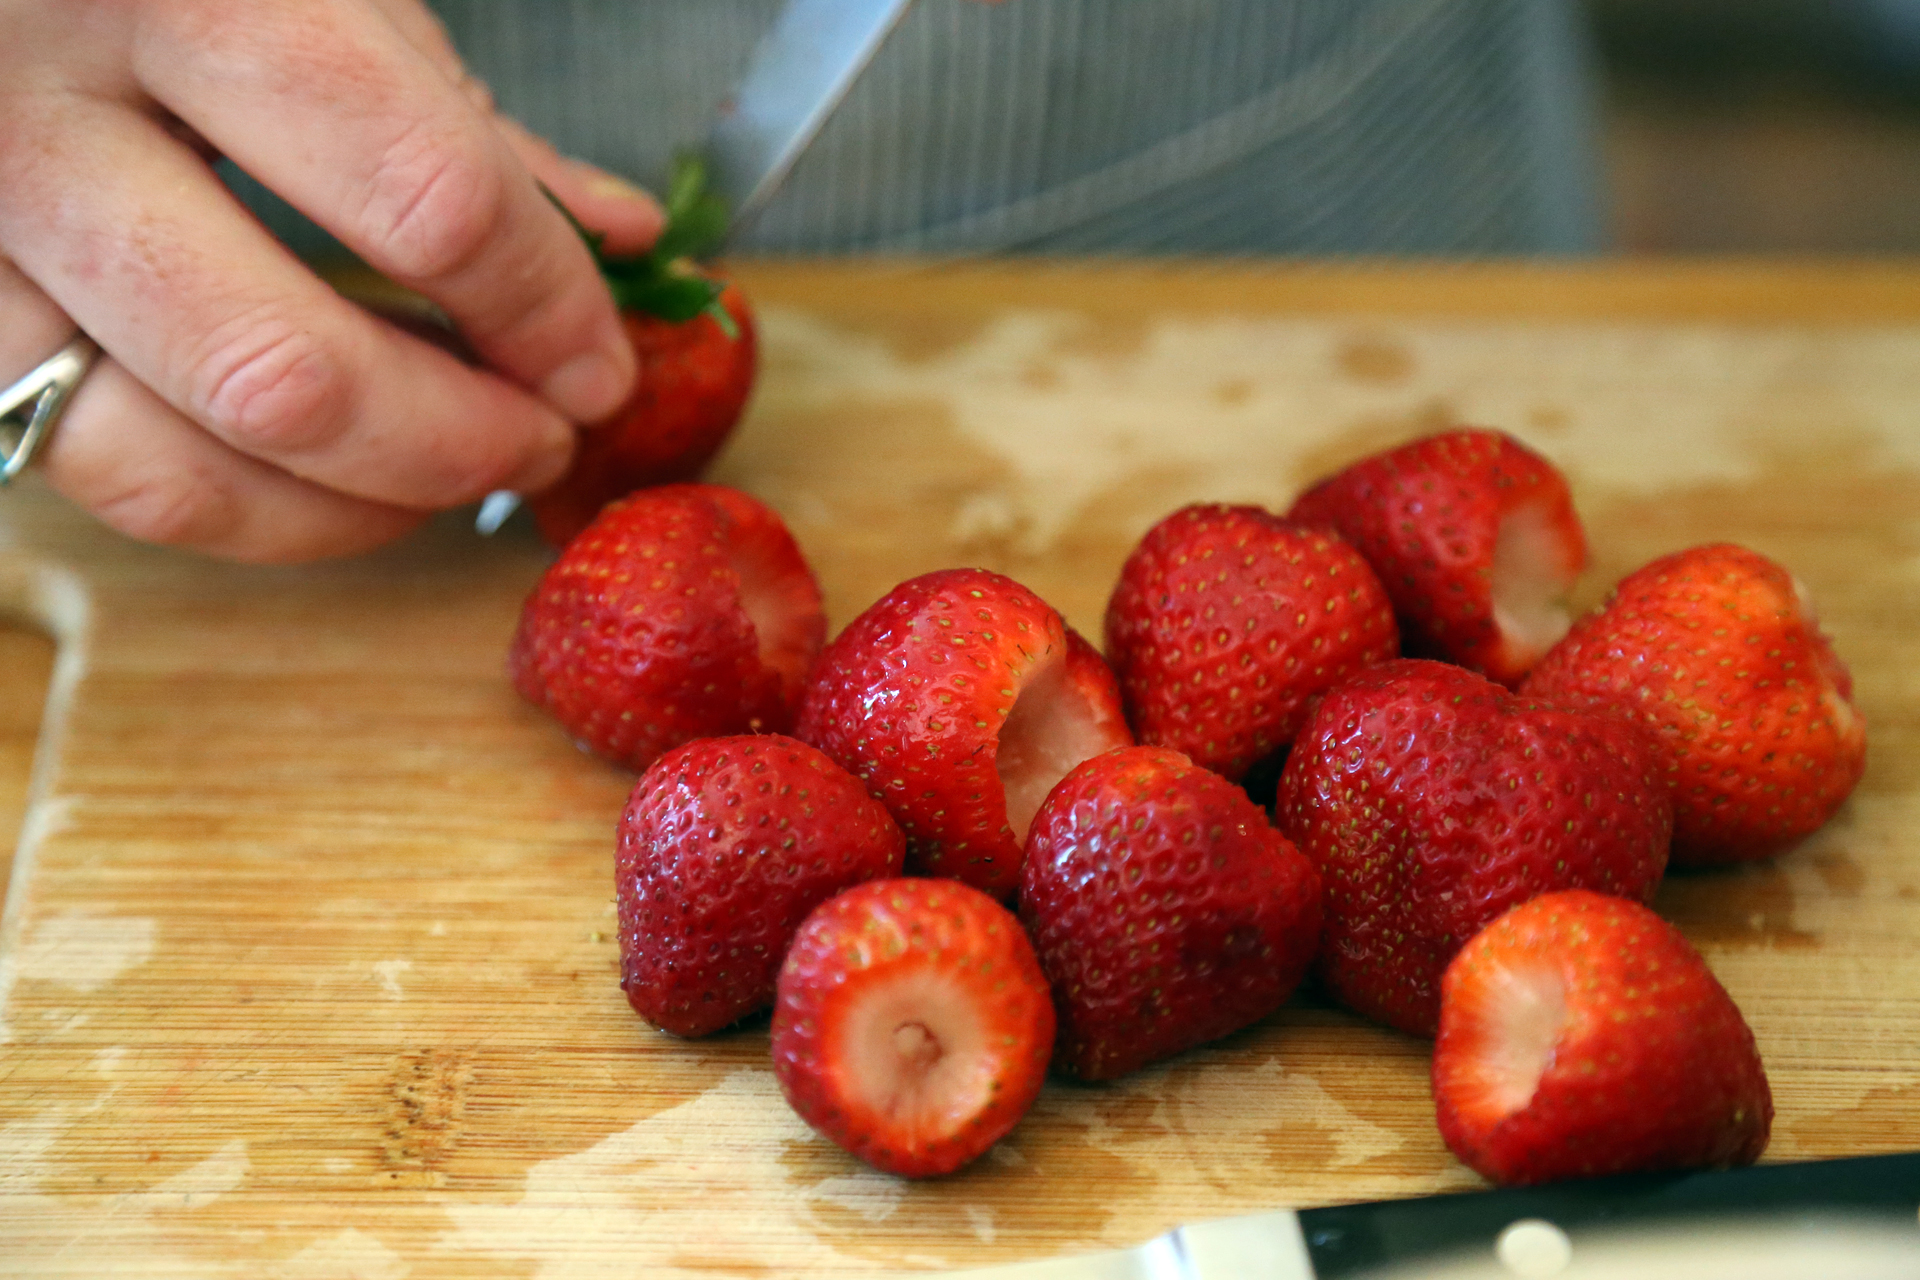 Hull the strawberries by removing the stem with a paring knife.